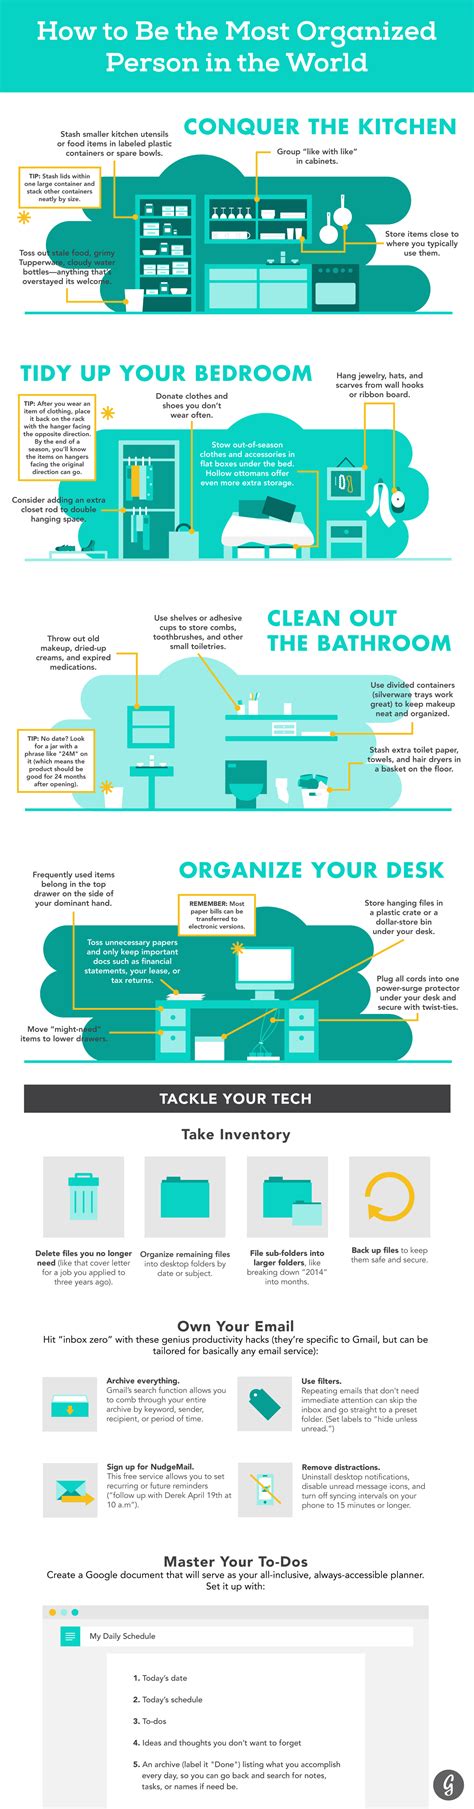 How To Be The Most Organized Person In The World Infographic Visualistan